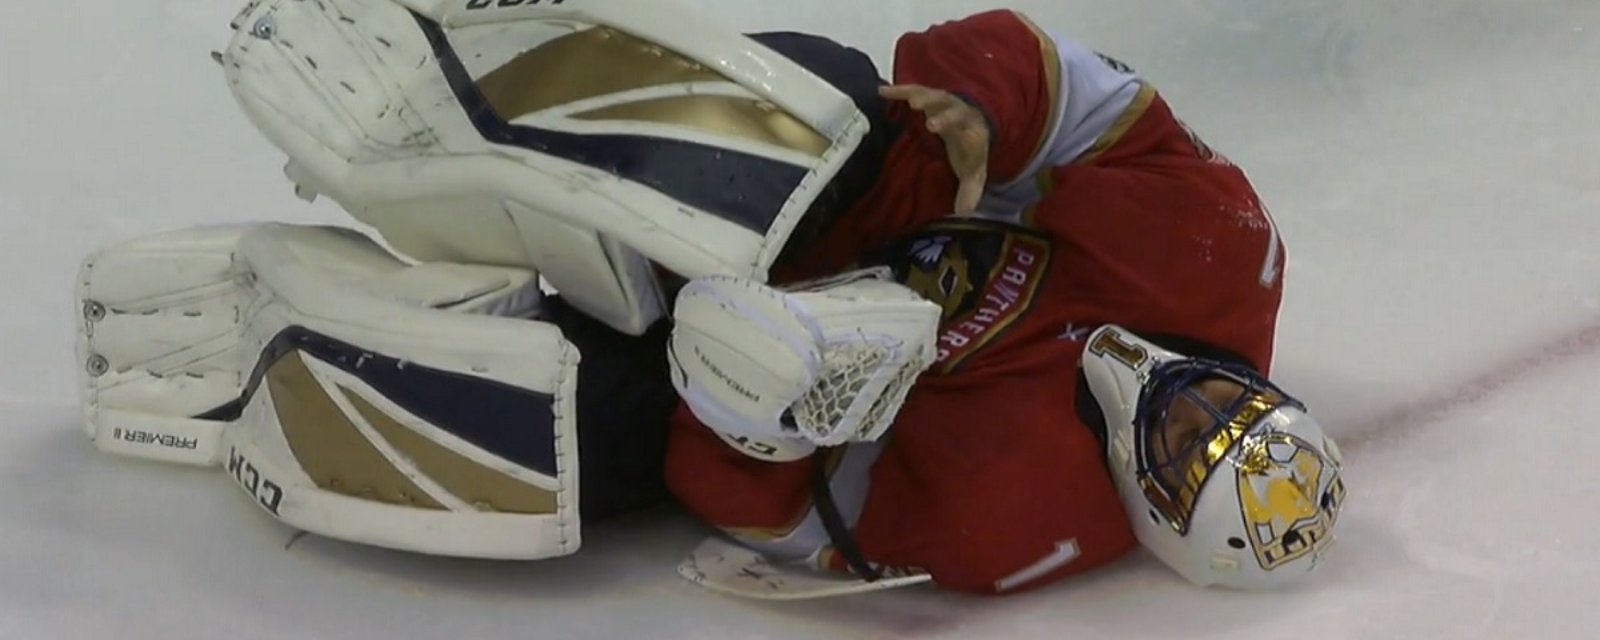 Breaking: Luongo goes down after getting hit in the crease.